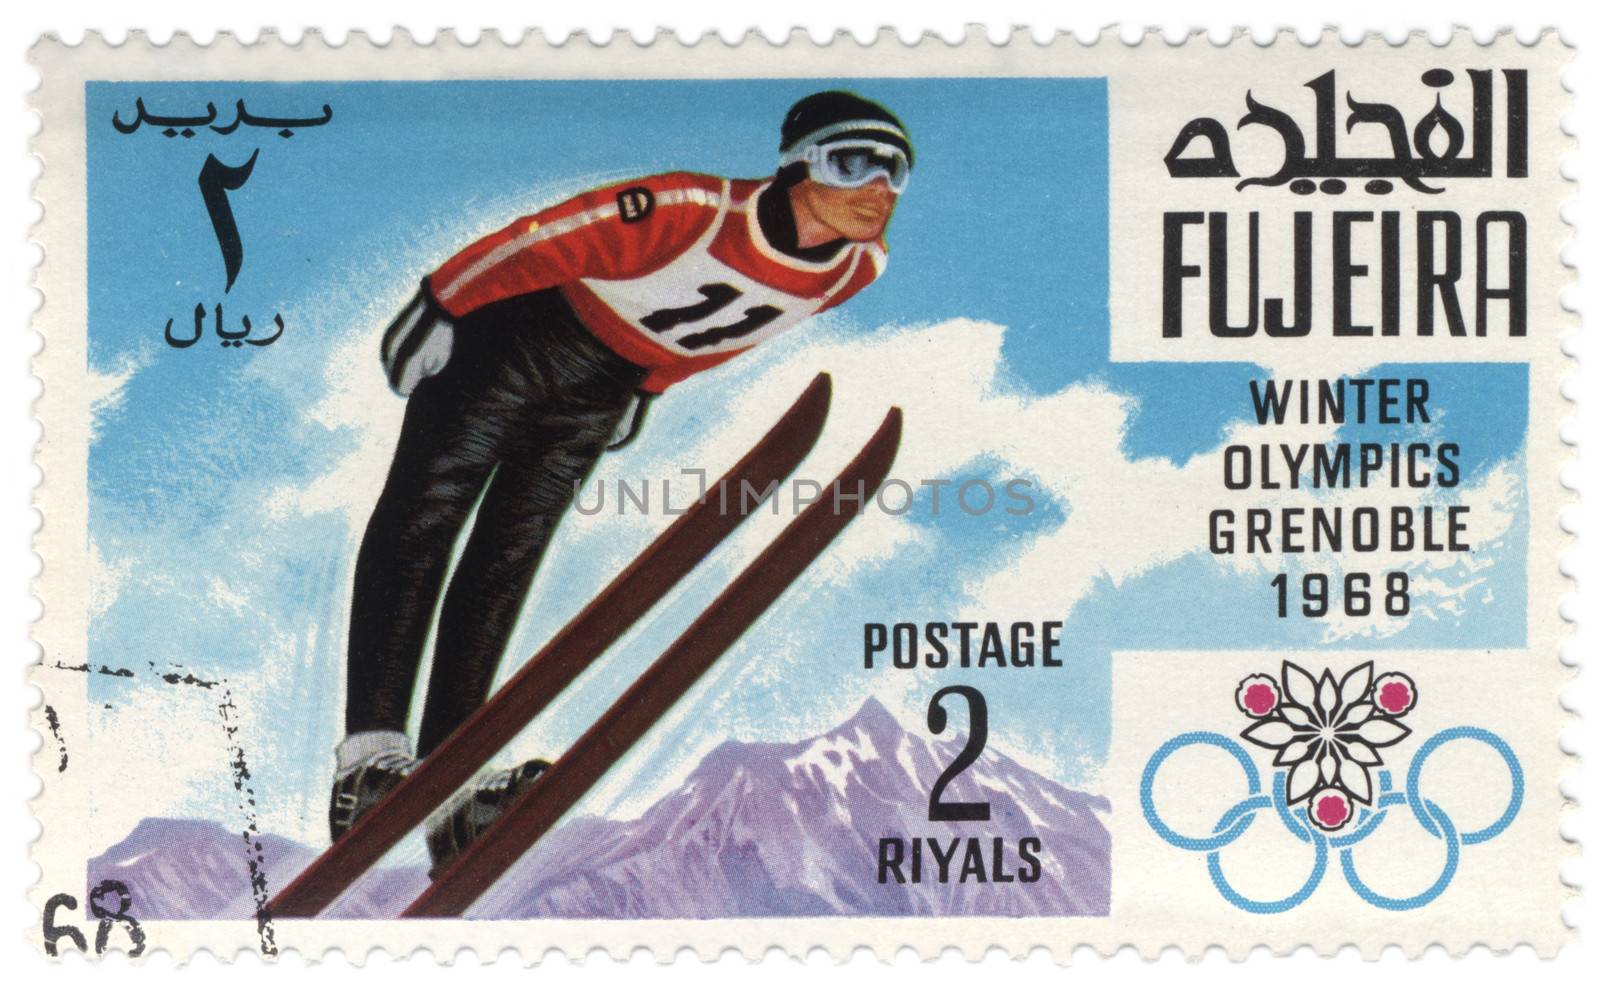 Ski jumper at the Winter Olympics in Grenoble on postage stamp by wander